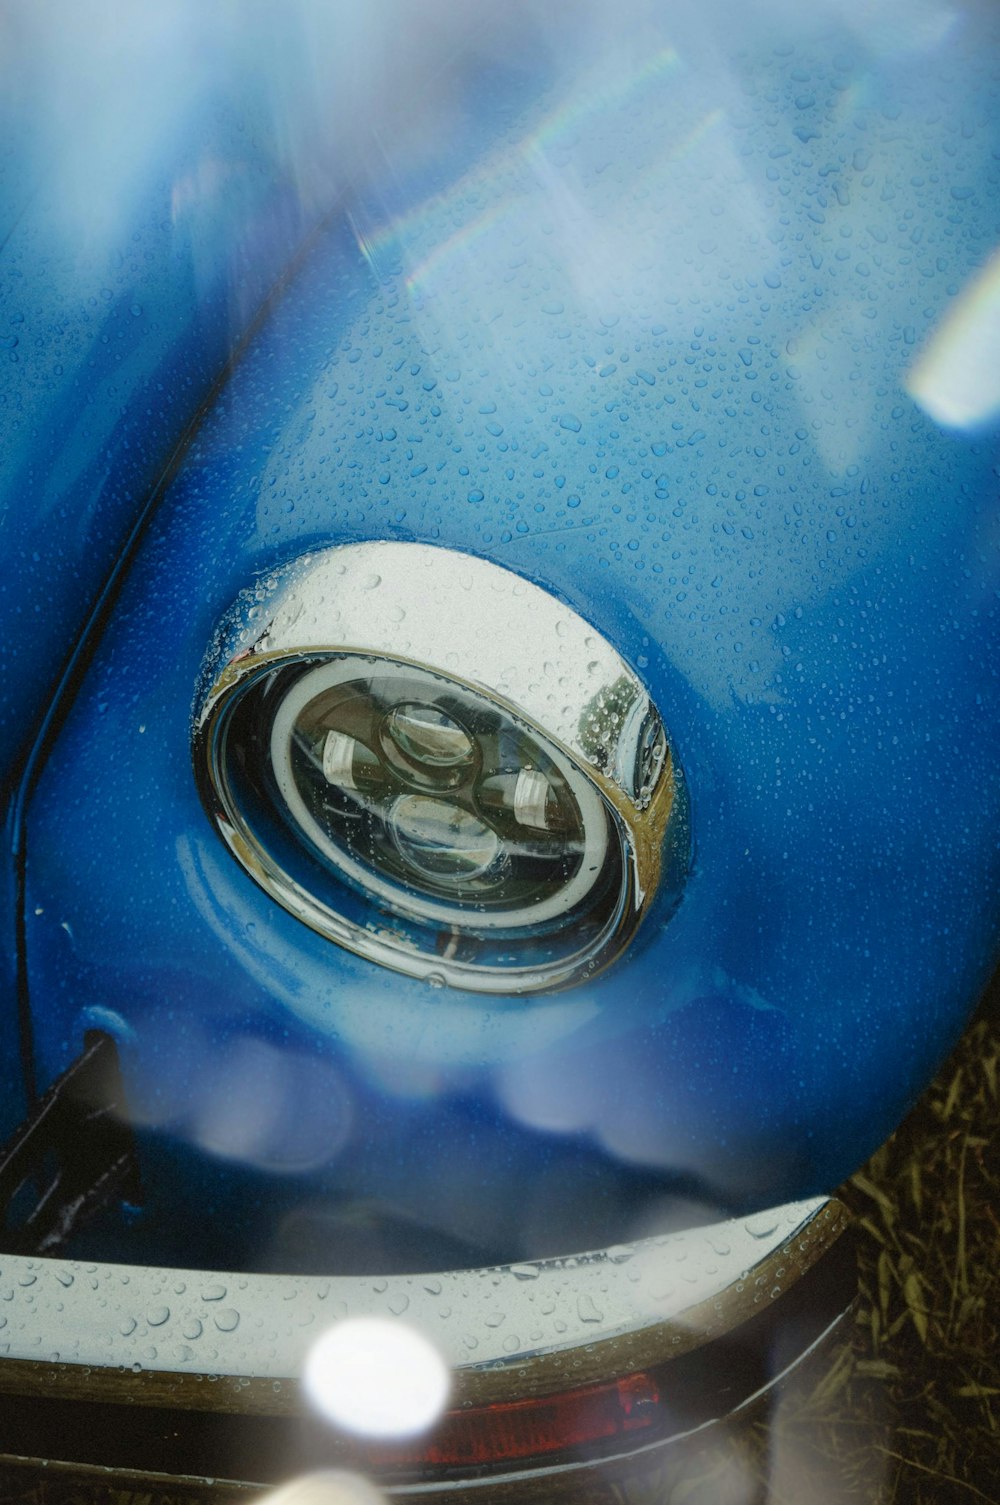 a close up of the front end of a blue car